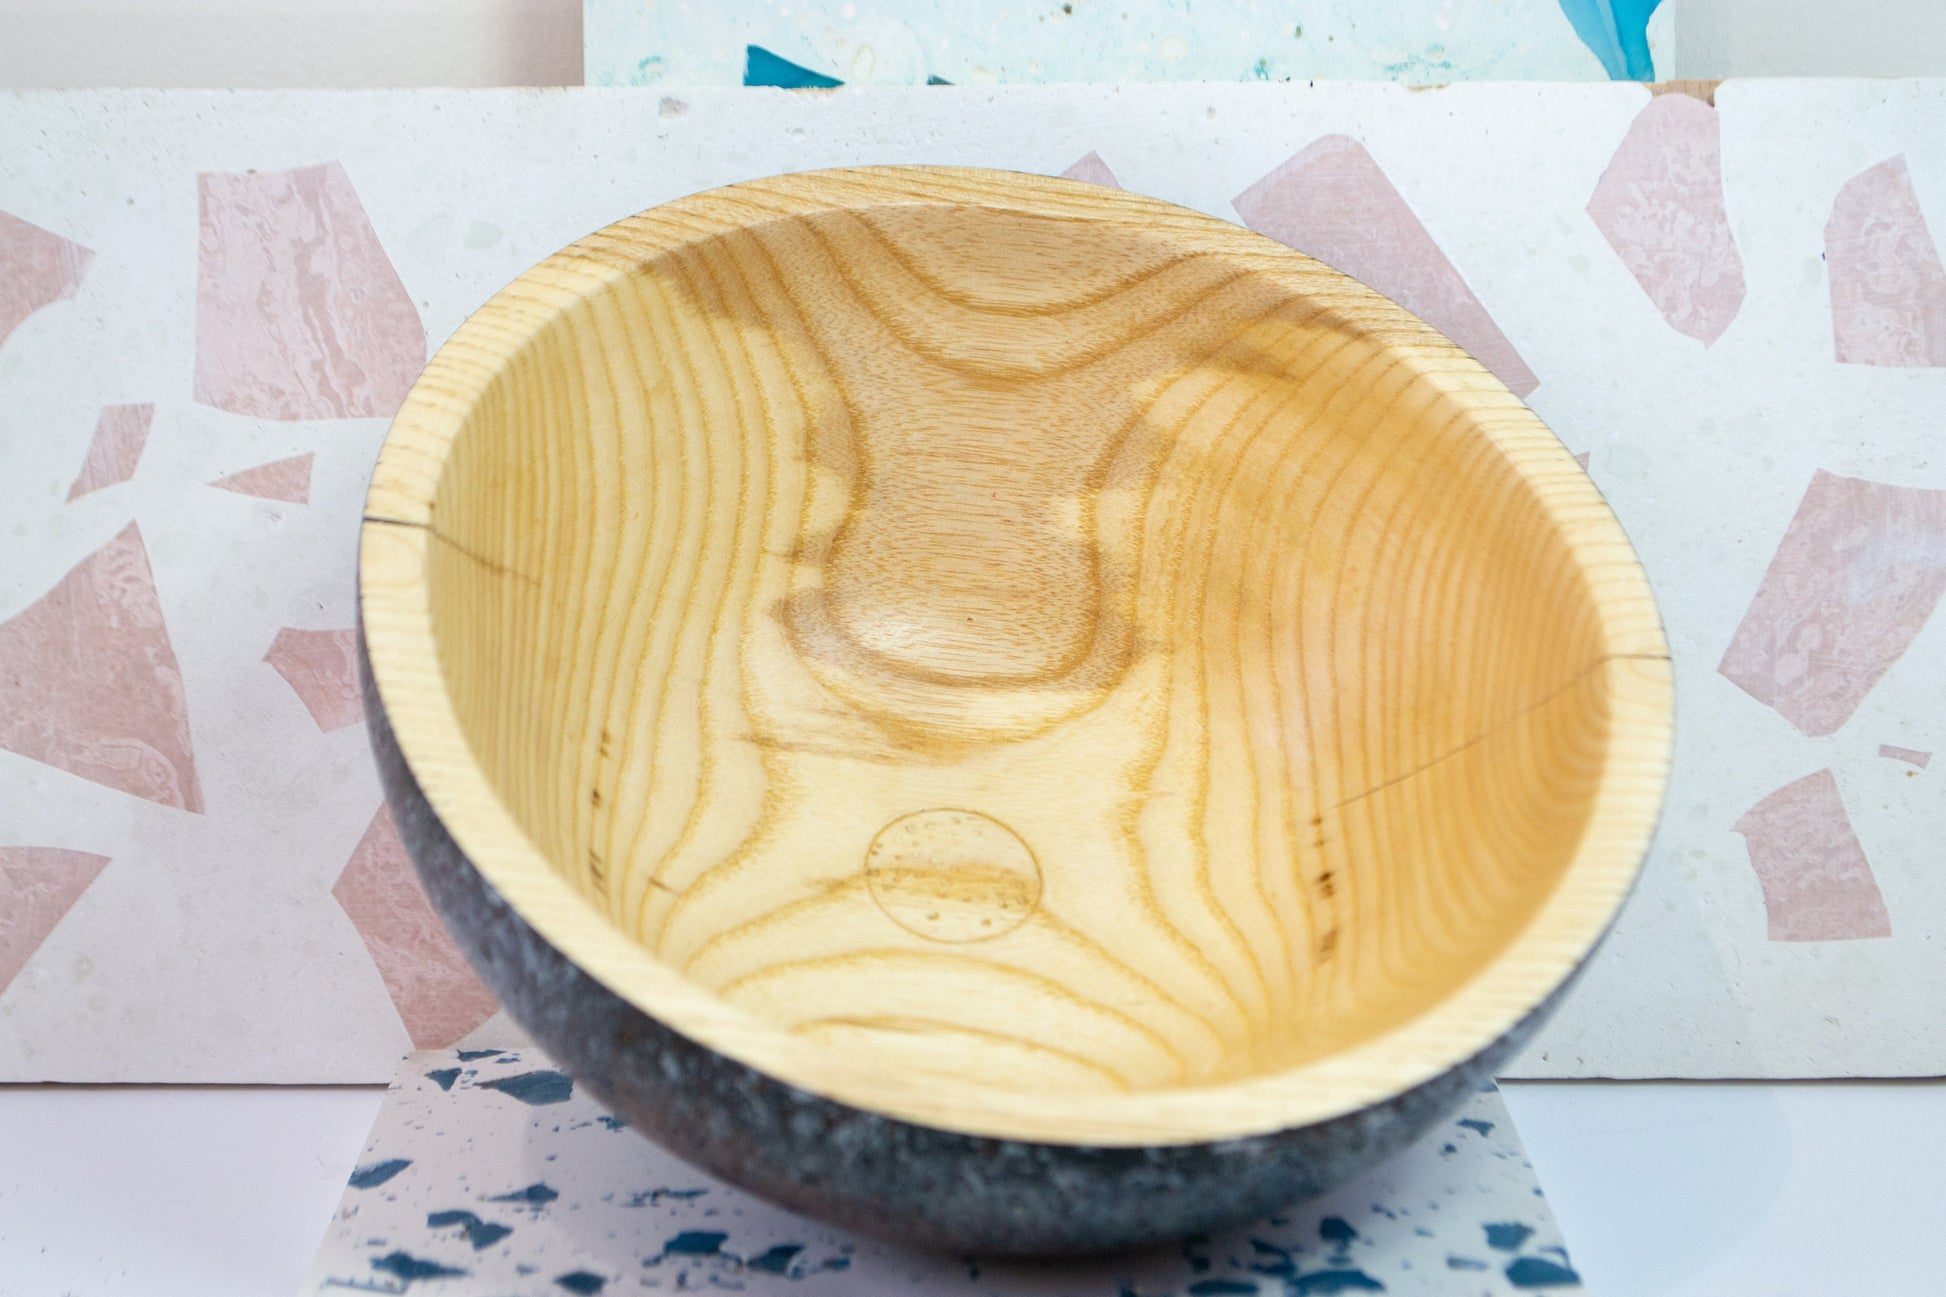 Hand turned ash wood bowl - Artistic Painted turned wood bowl